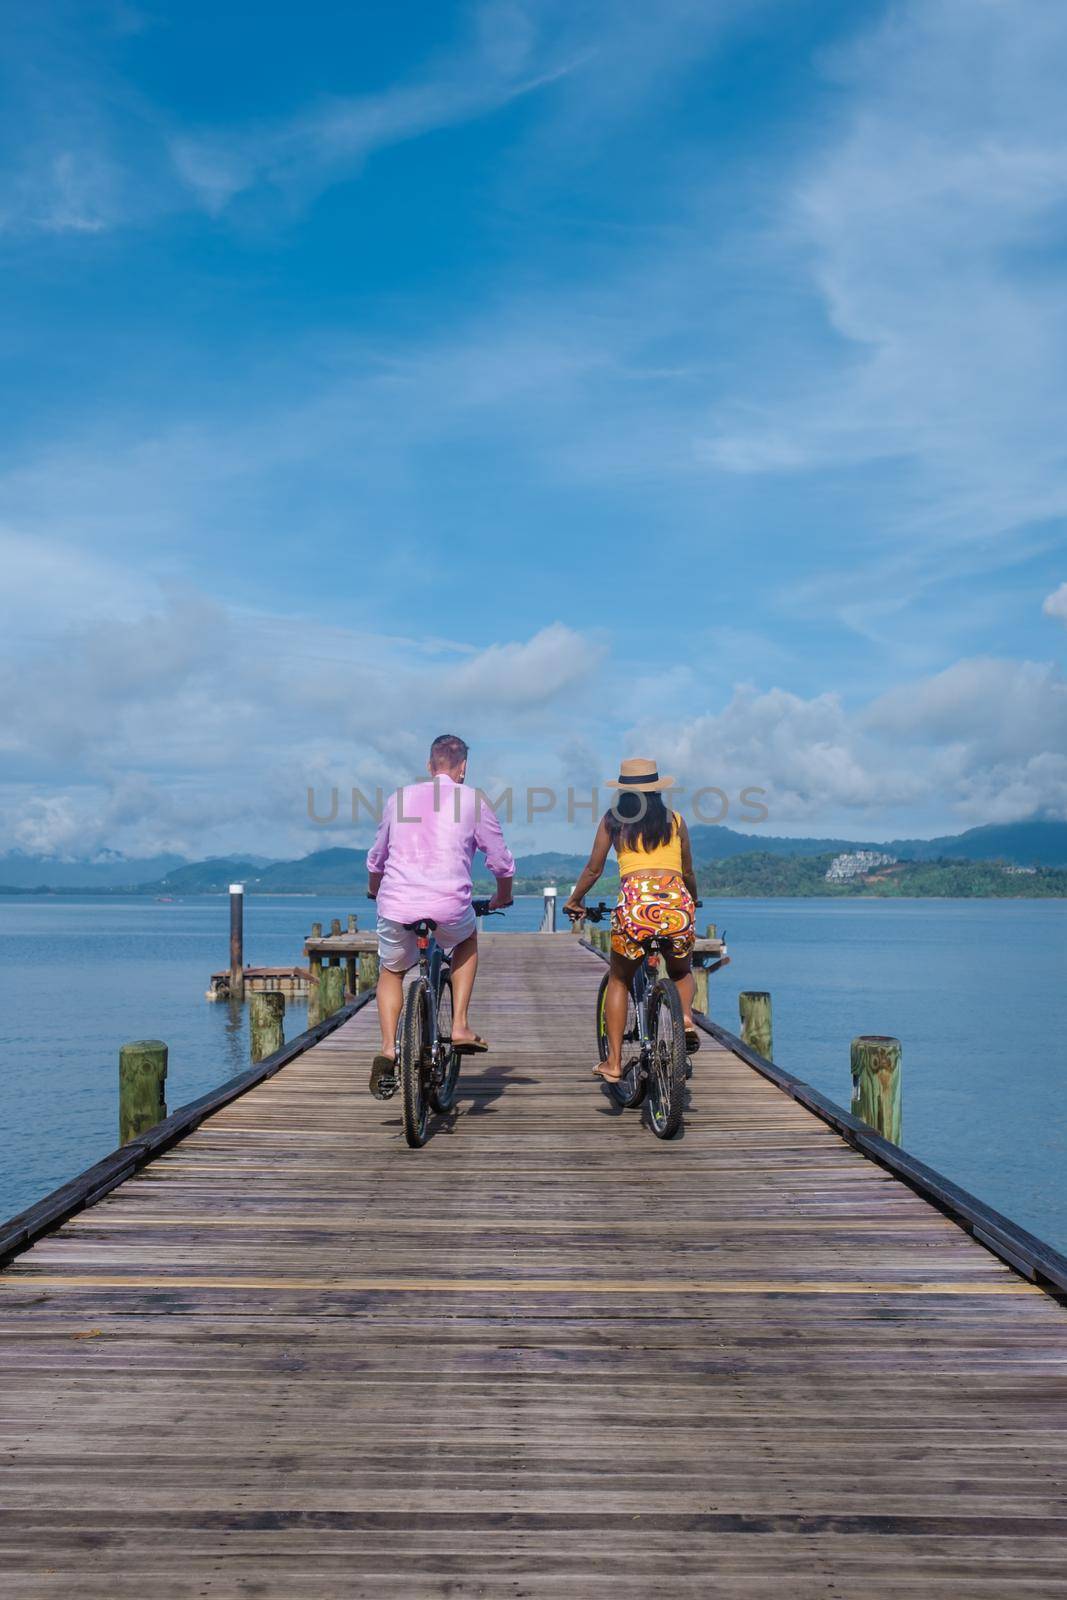 men and woman on a bicycle, couple men and woman on a tropical island with wooden pier jetty in Thailand Phuket Naka Island by fokkebok